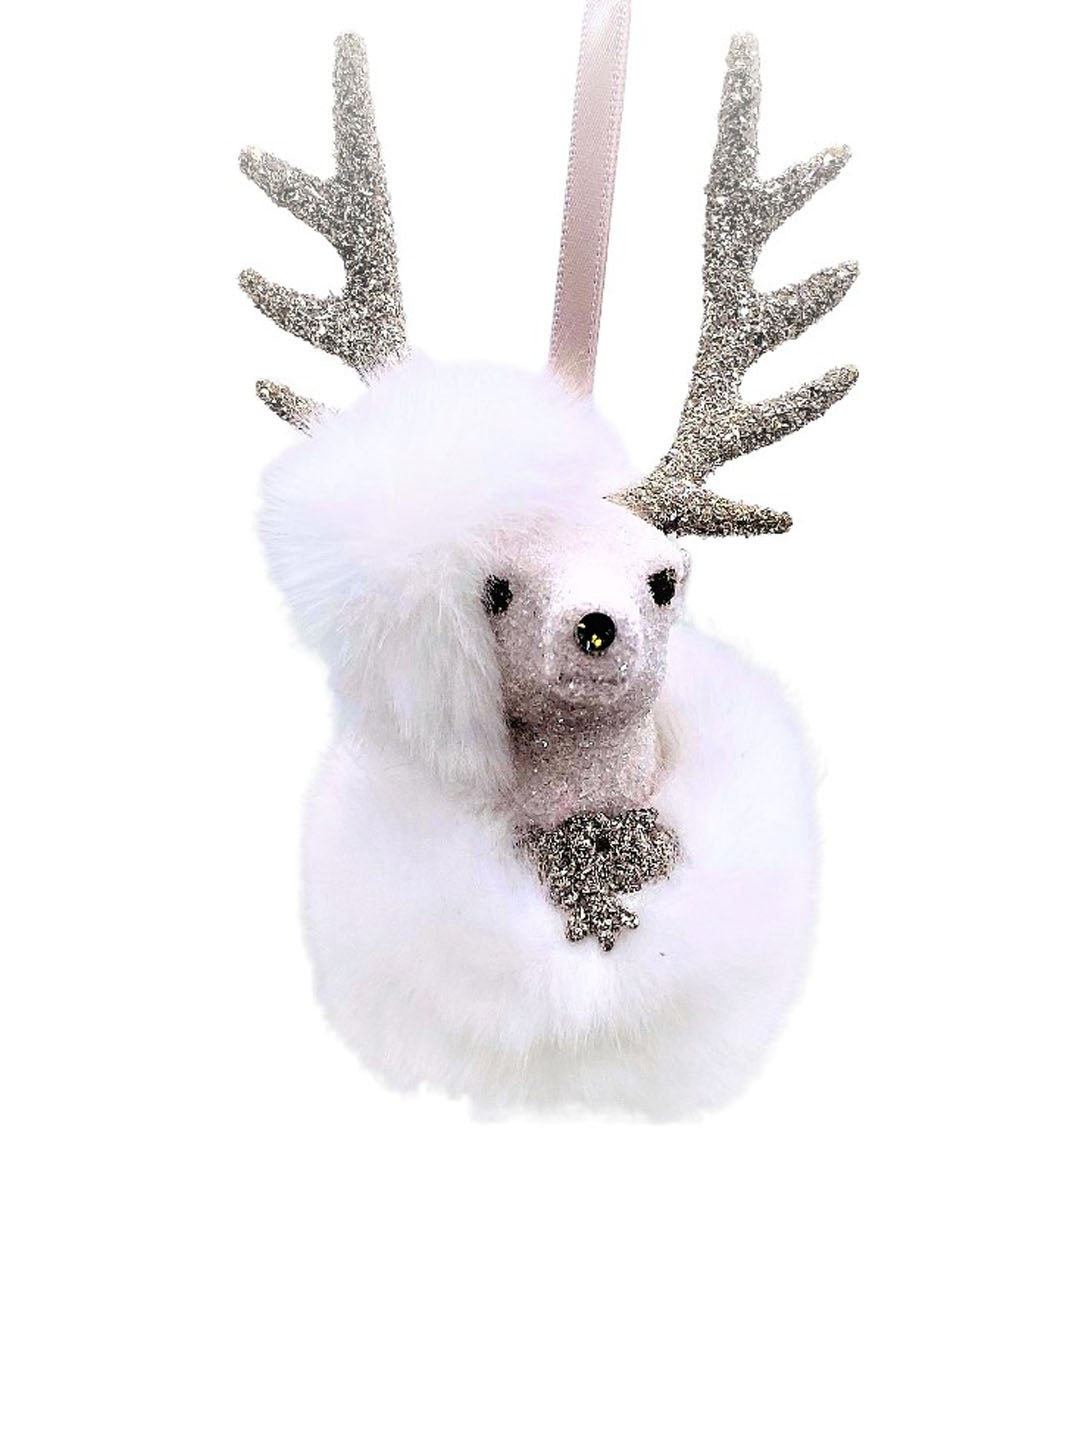 Stag with Crown Ornament 3.5" x 6" - Dove, Snow Fur